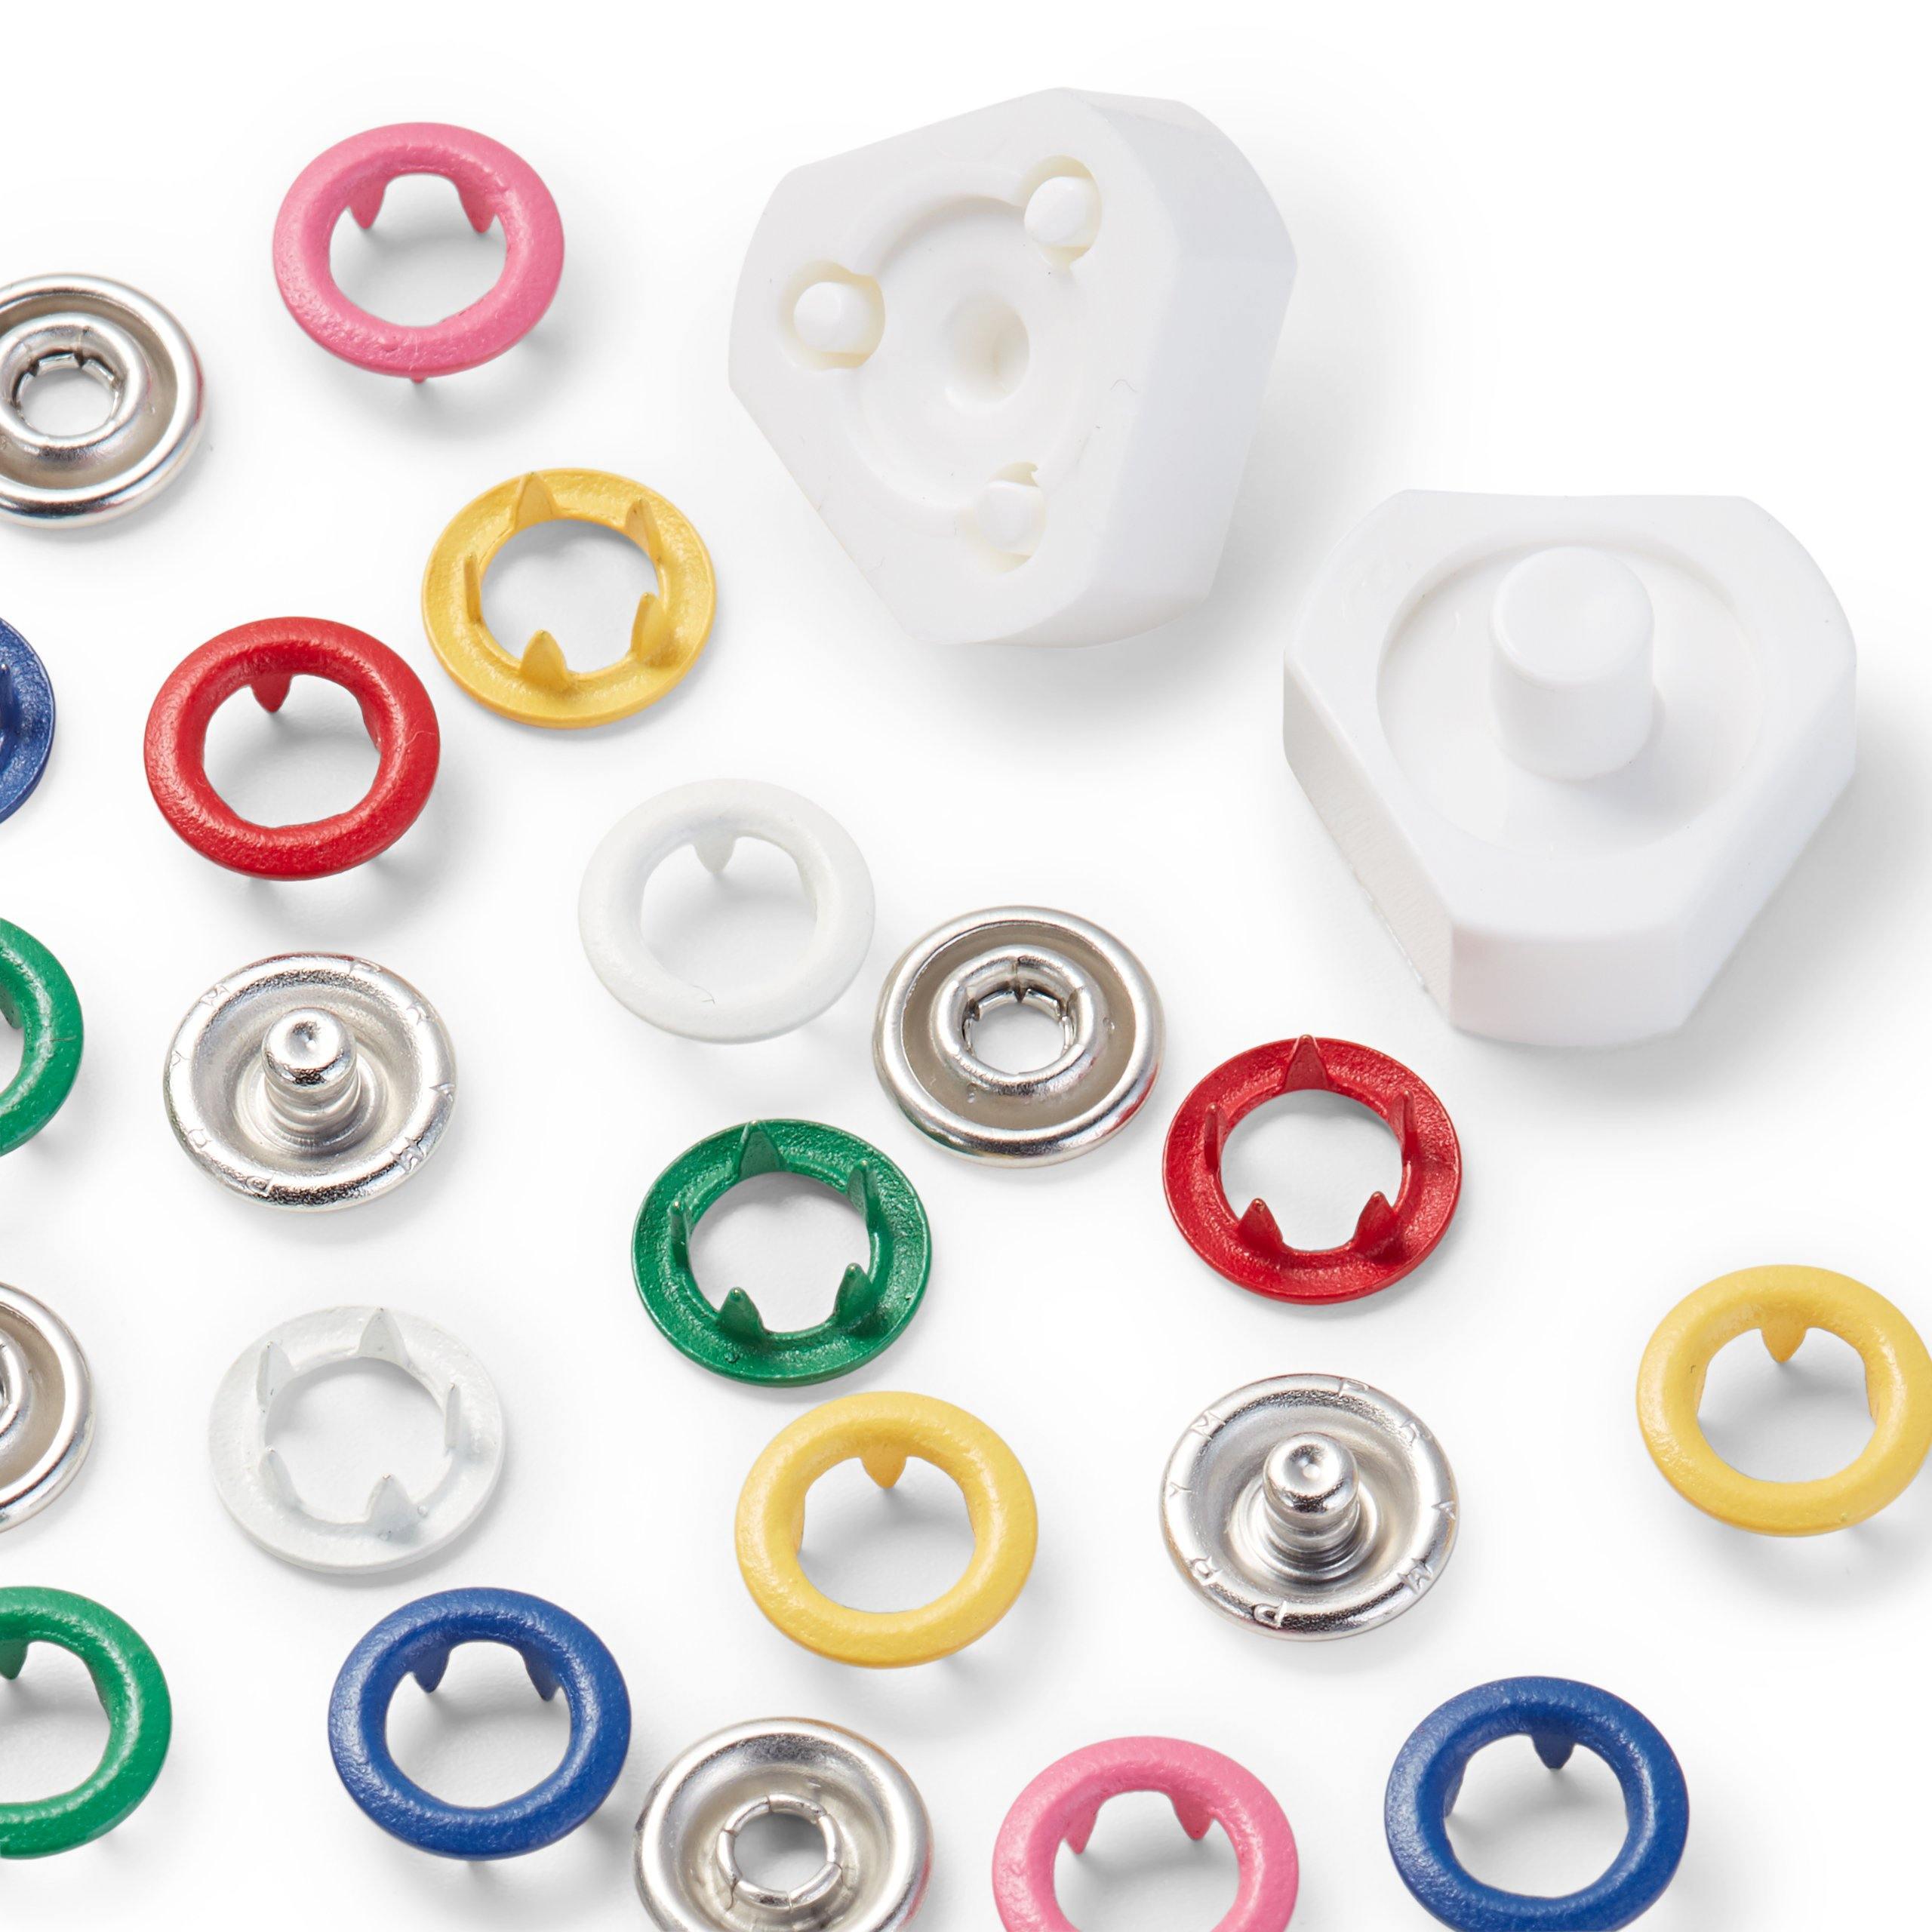 Snap buttons - Prym 8mm Non-sew metal snap fasteners set of 6 colours-Accessories-Jelly Fabrics